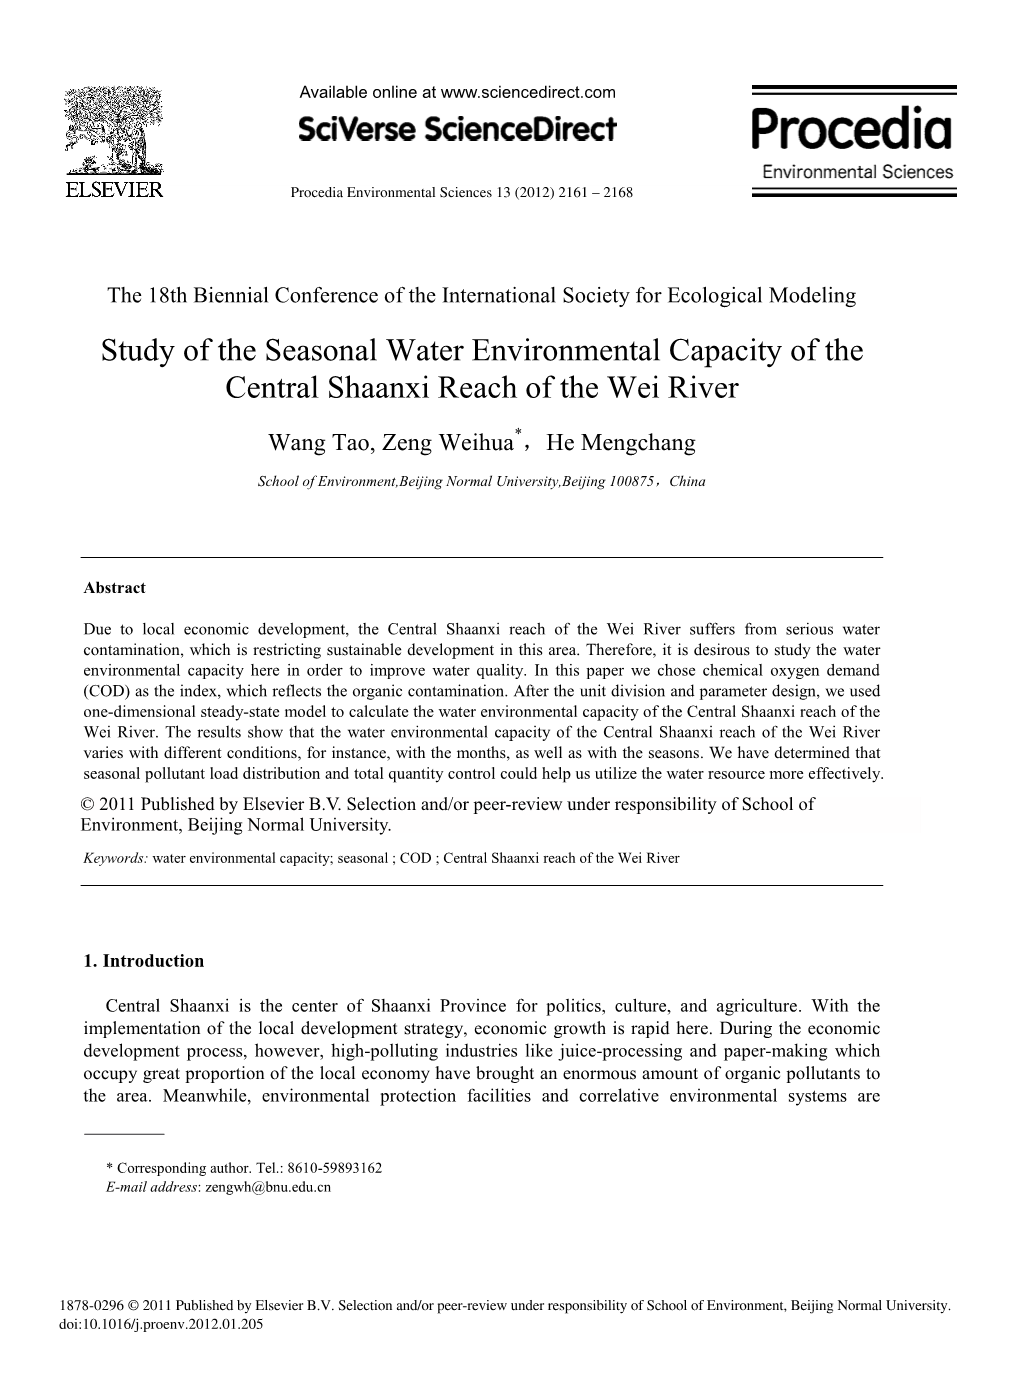 Study of the Seasonal Water Environmental Capacity of the Central Shaanxi Reach of the Wei River